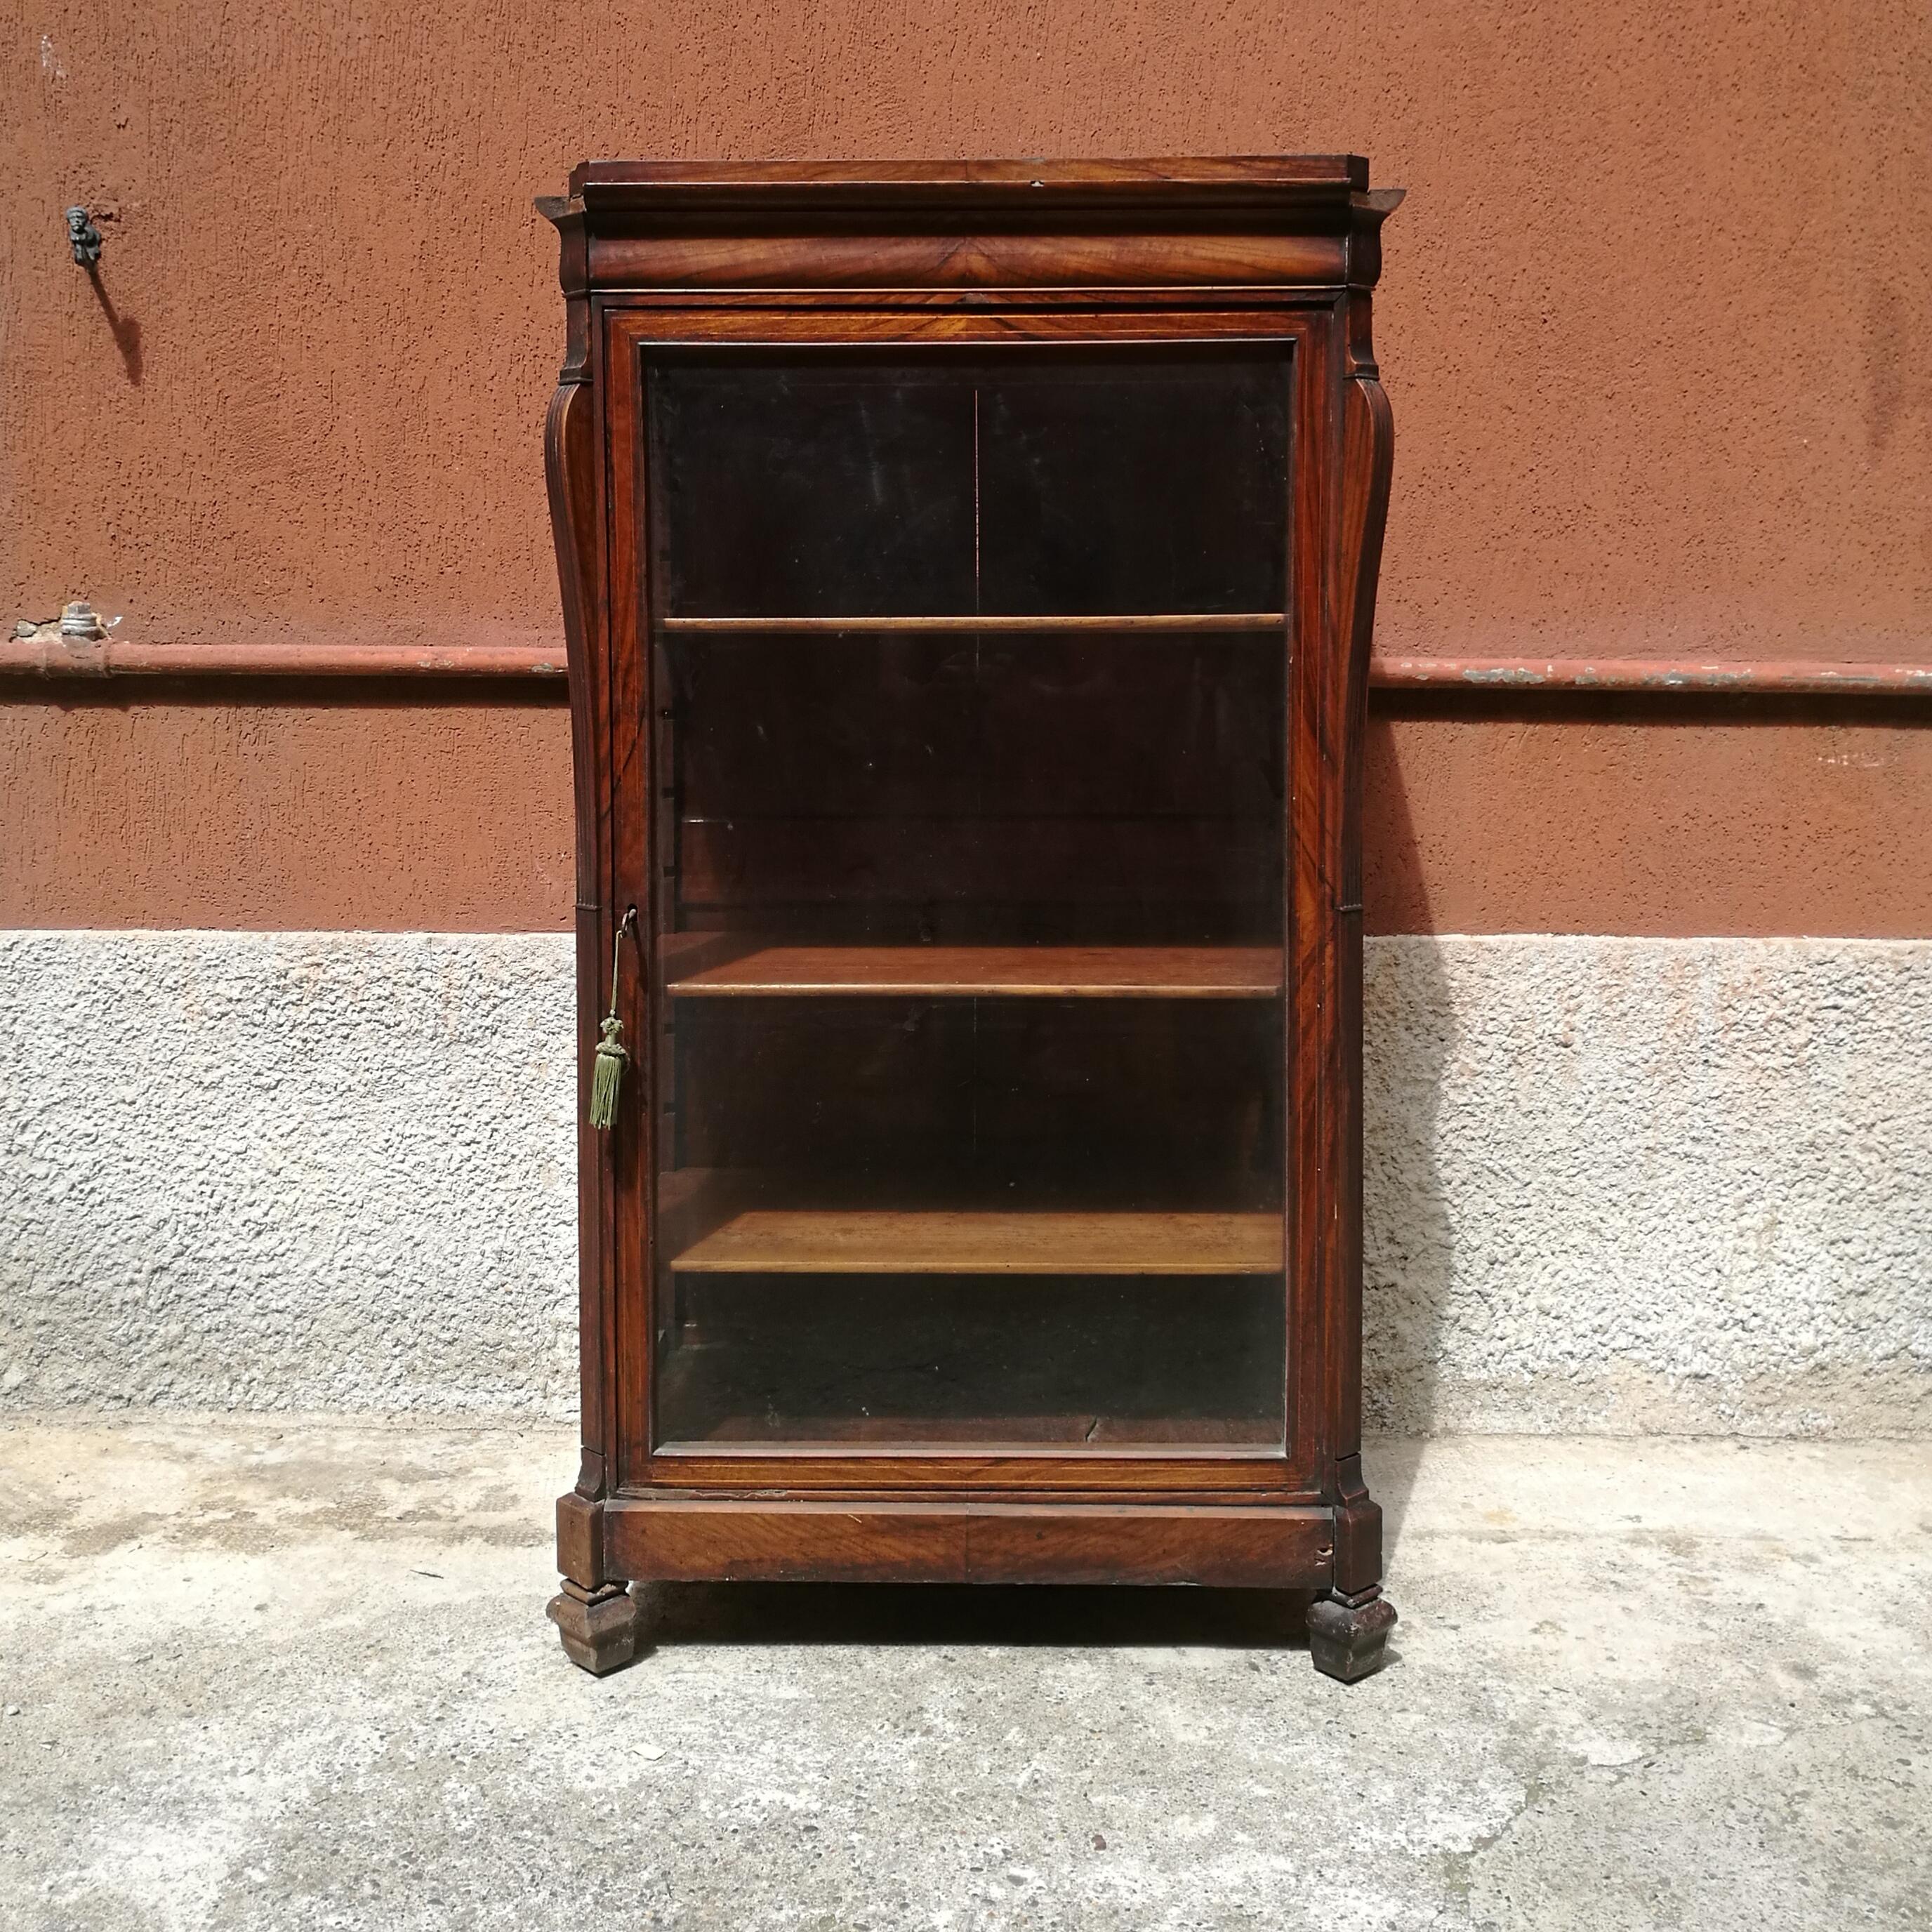 Antique English mahogany display cabinet, 1800s.
Antique mahogany display case from the first half of the 19th century, produced in England by the splendid manufacture. Unique showcase to collect.

Very good condition.